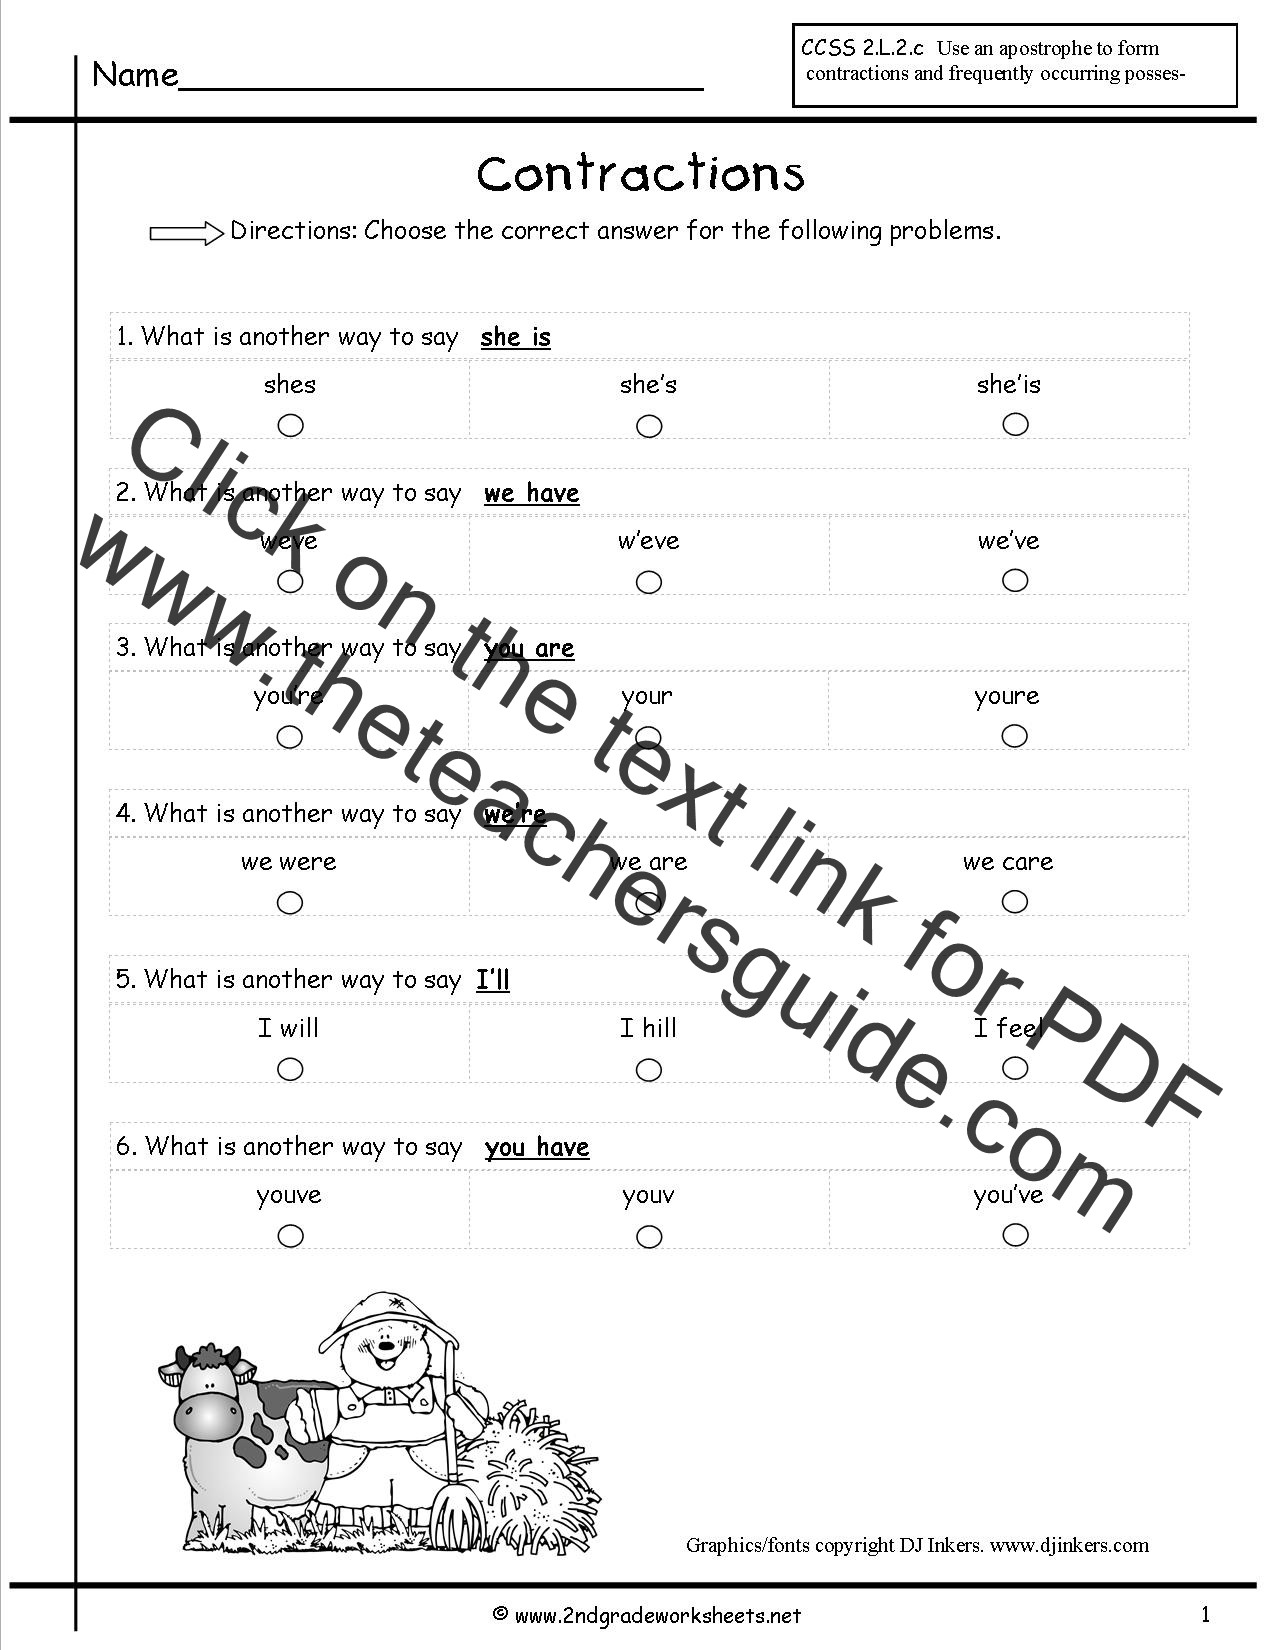 Contractions Worksheet 2nd Grade Free Contractions Worksheets and Printouts